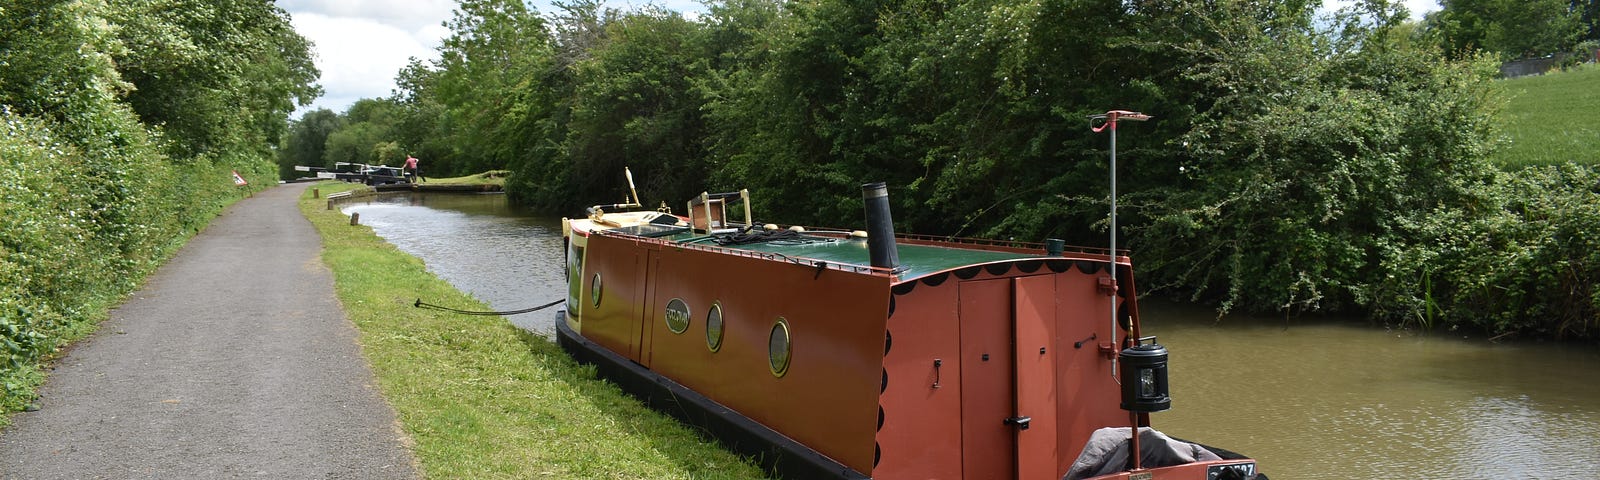 A moored narrowboat on a canal with a broad towpath.